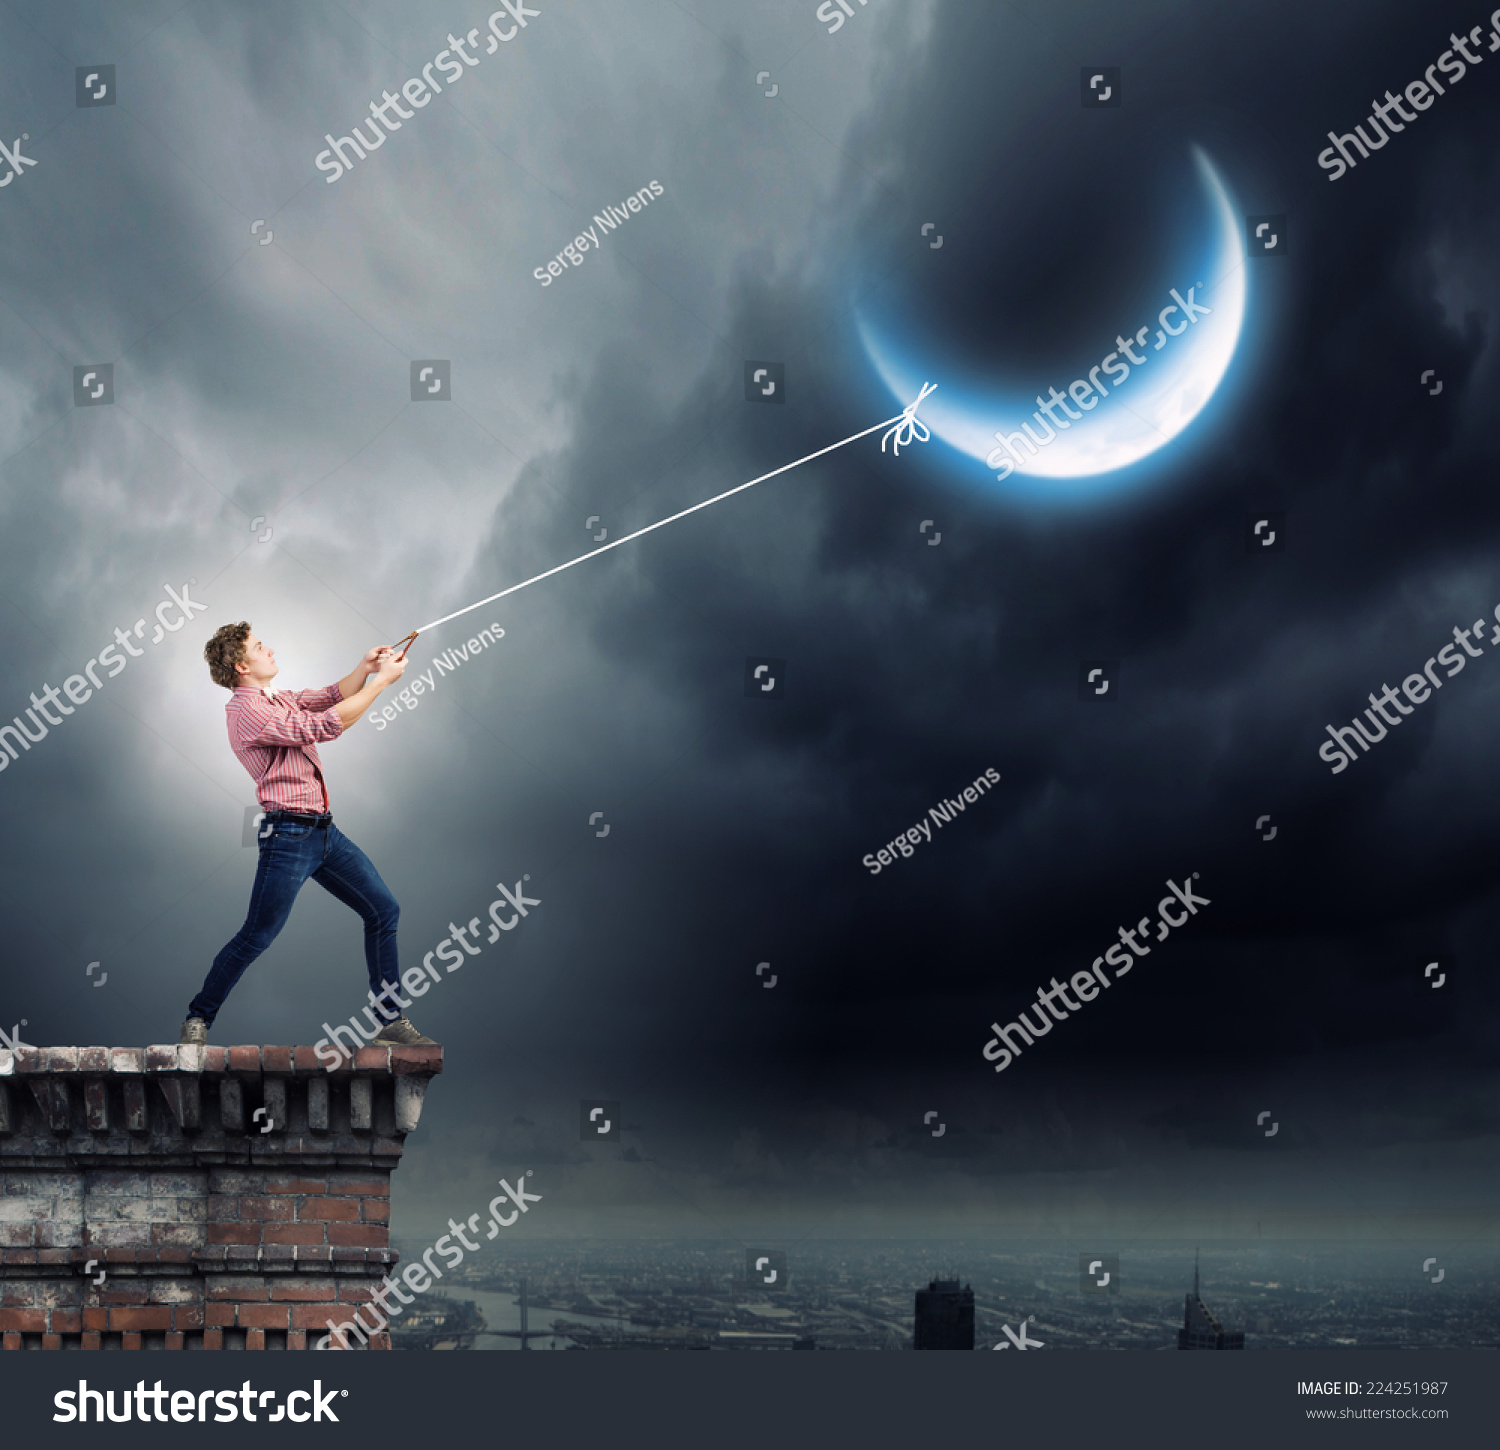 young-man-casual-catching-moon-rope-stock-photo-224251987-shutterstock